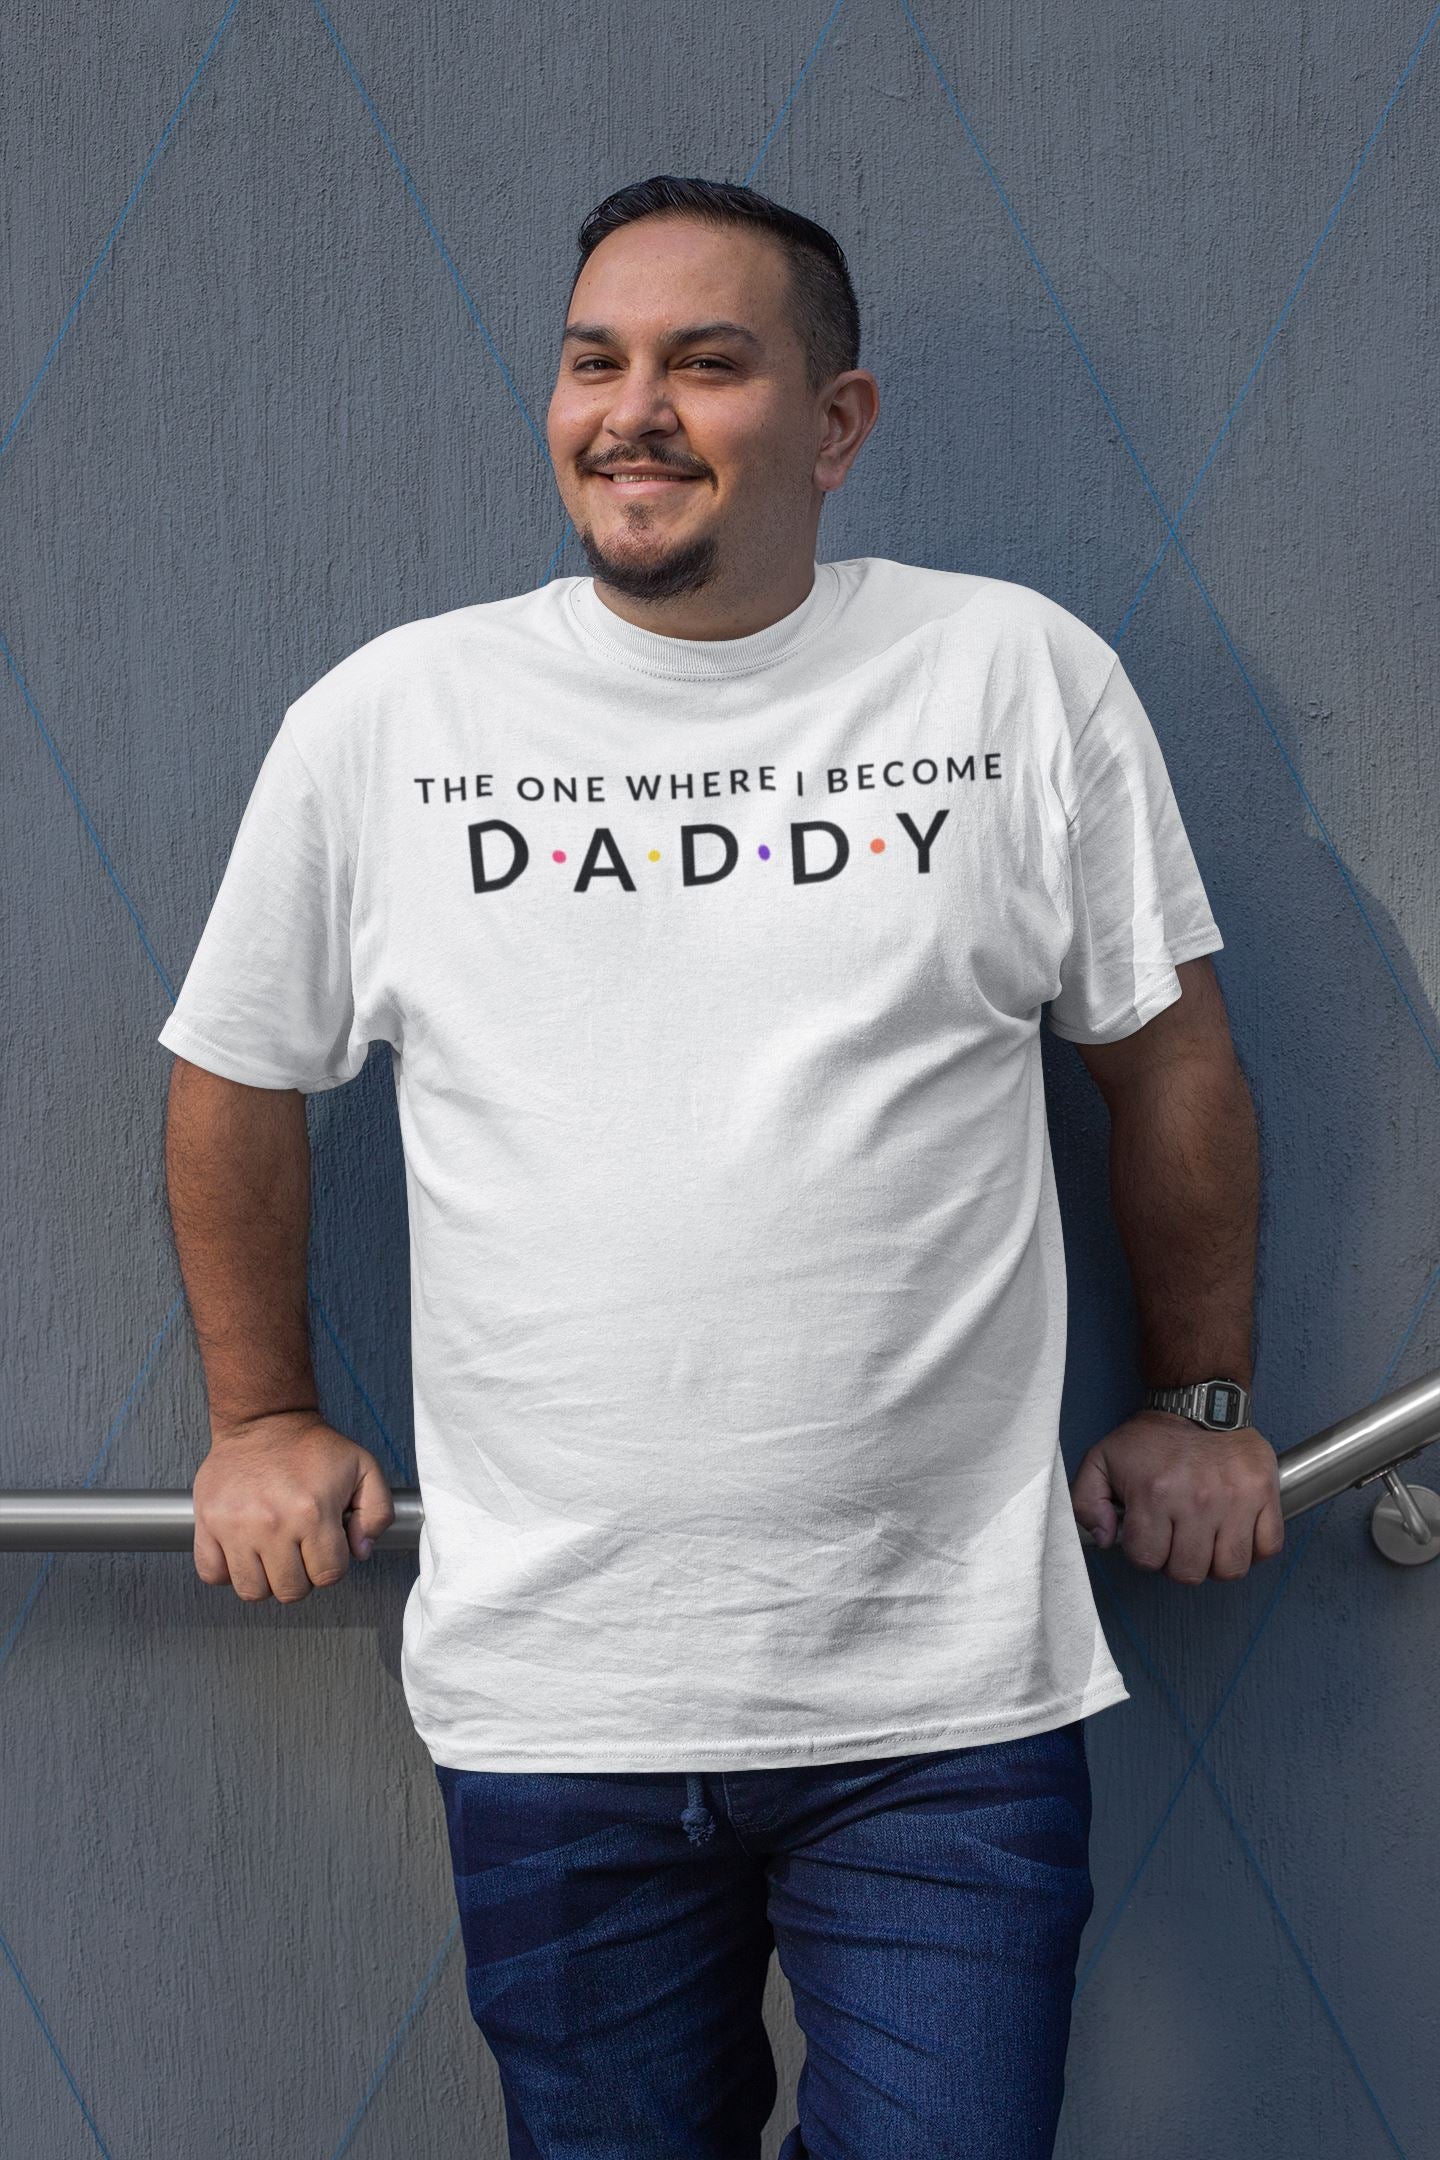 The One Where I Become Daddy Supreme White T Shirt for Men freeshipping - Catch My Drift India